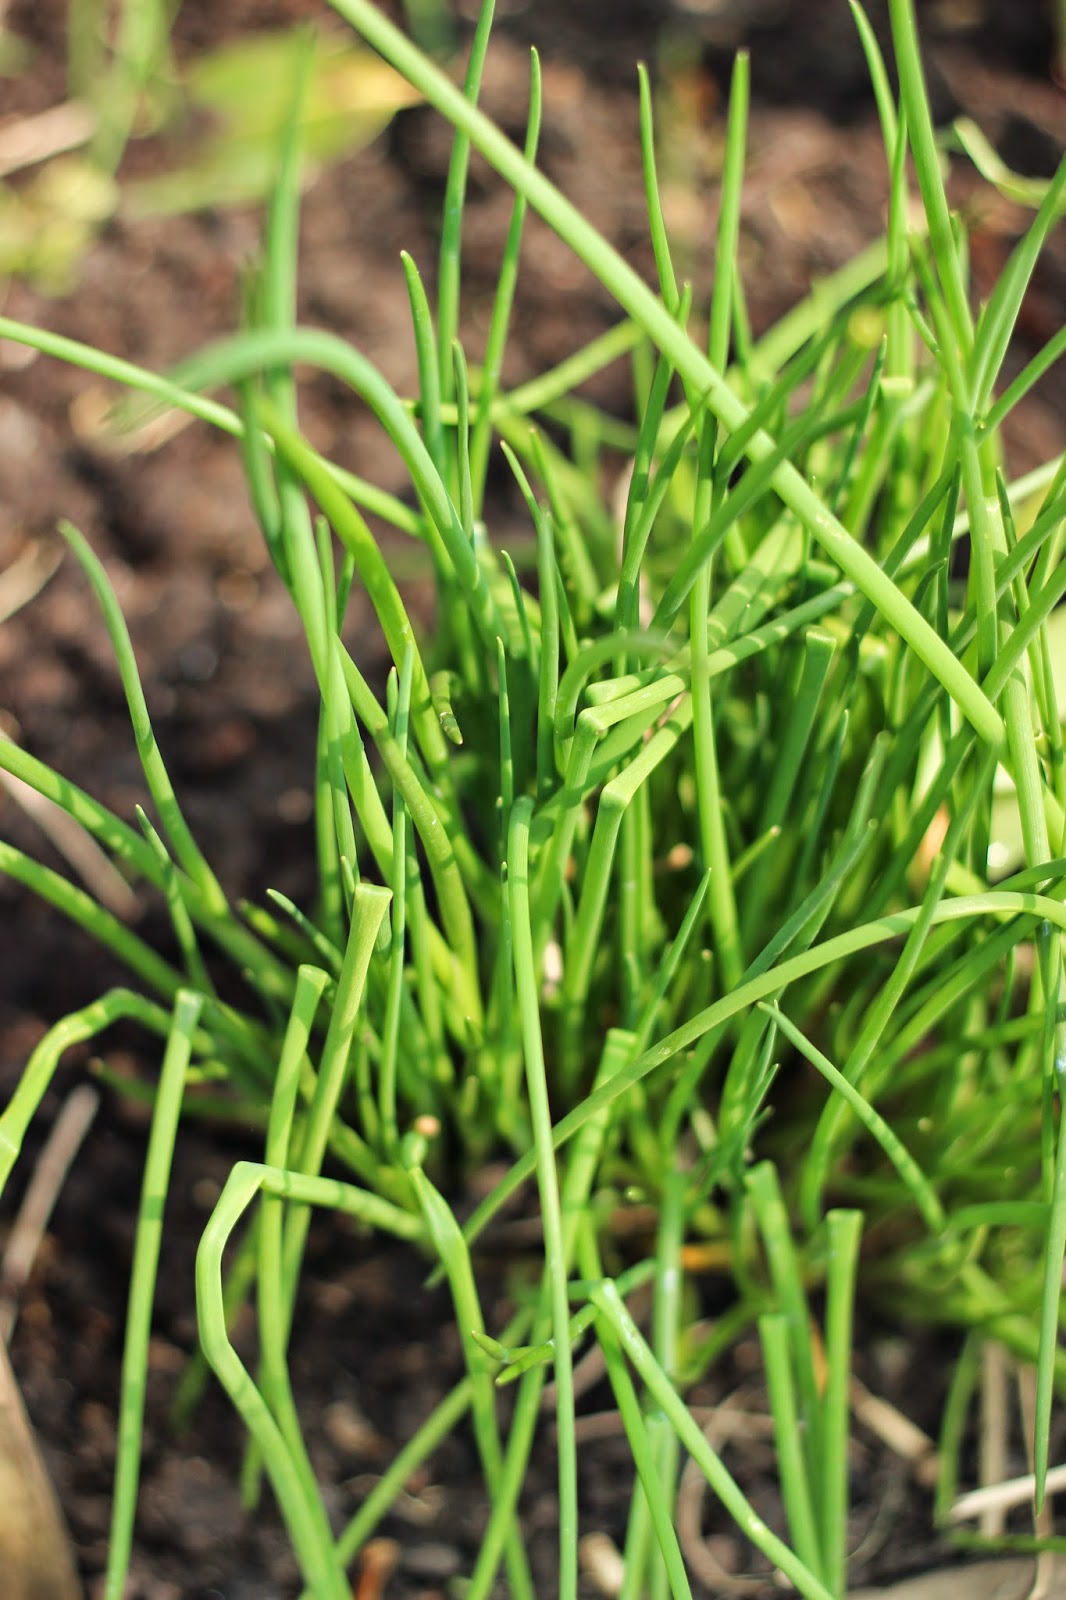 Growing chives - divide in spring to make more plants.